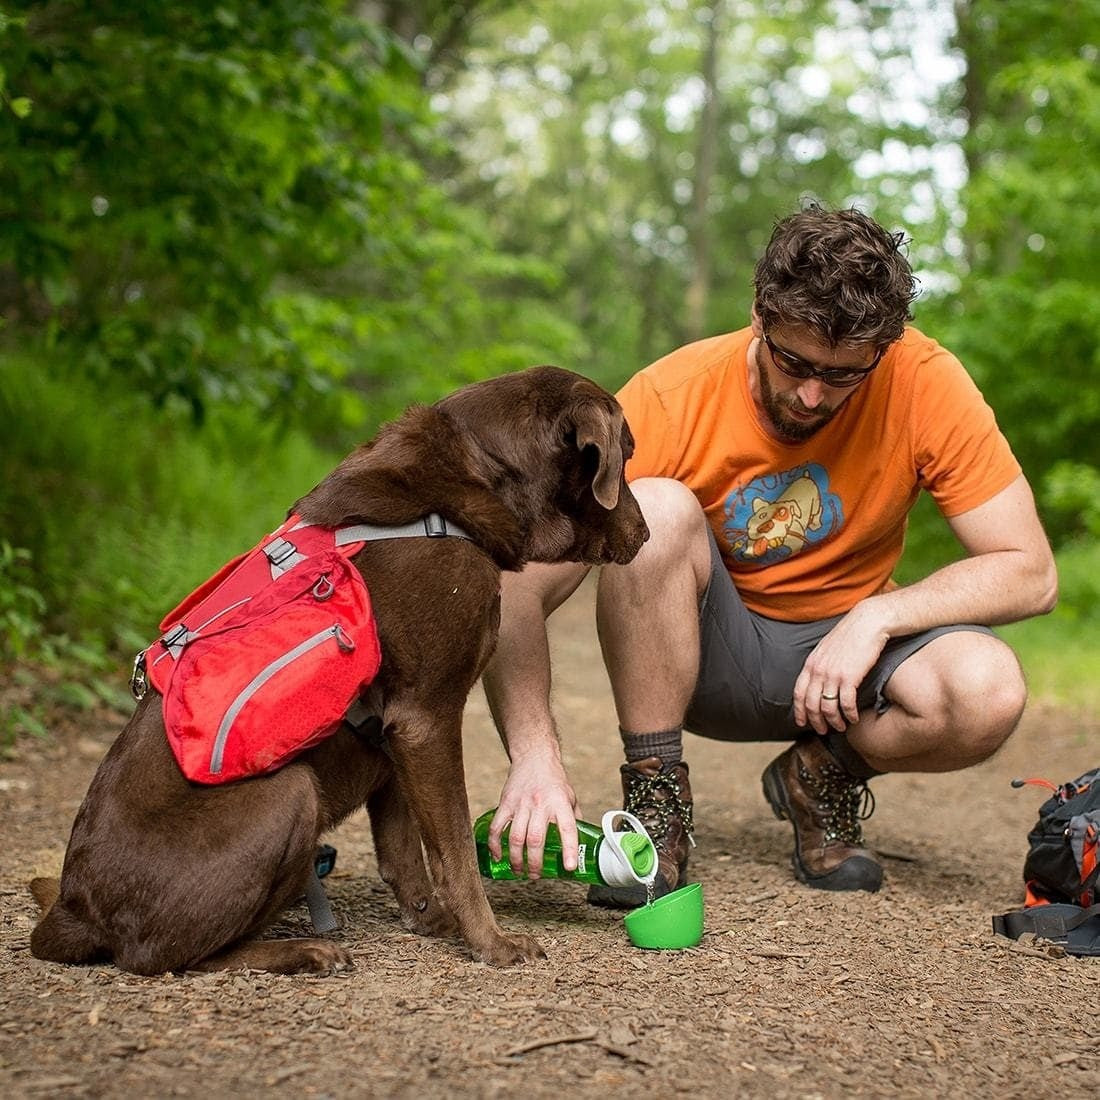 Man pouring water from bottle for dog in collapsible bowl outdoors.